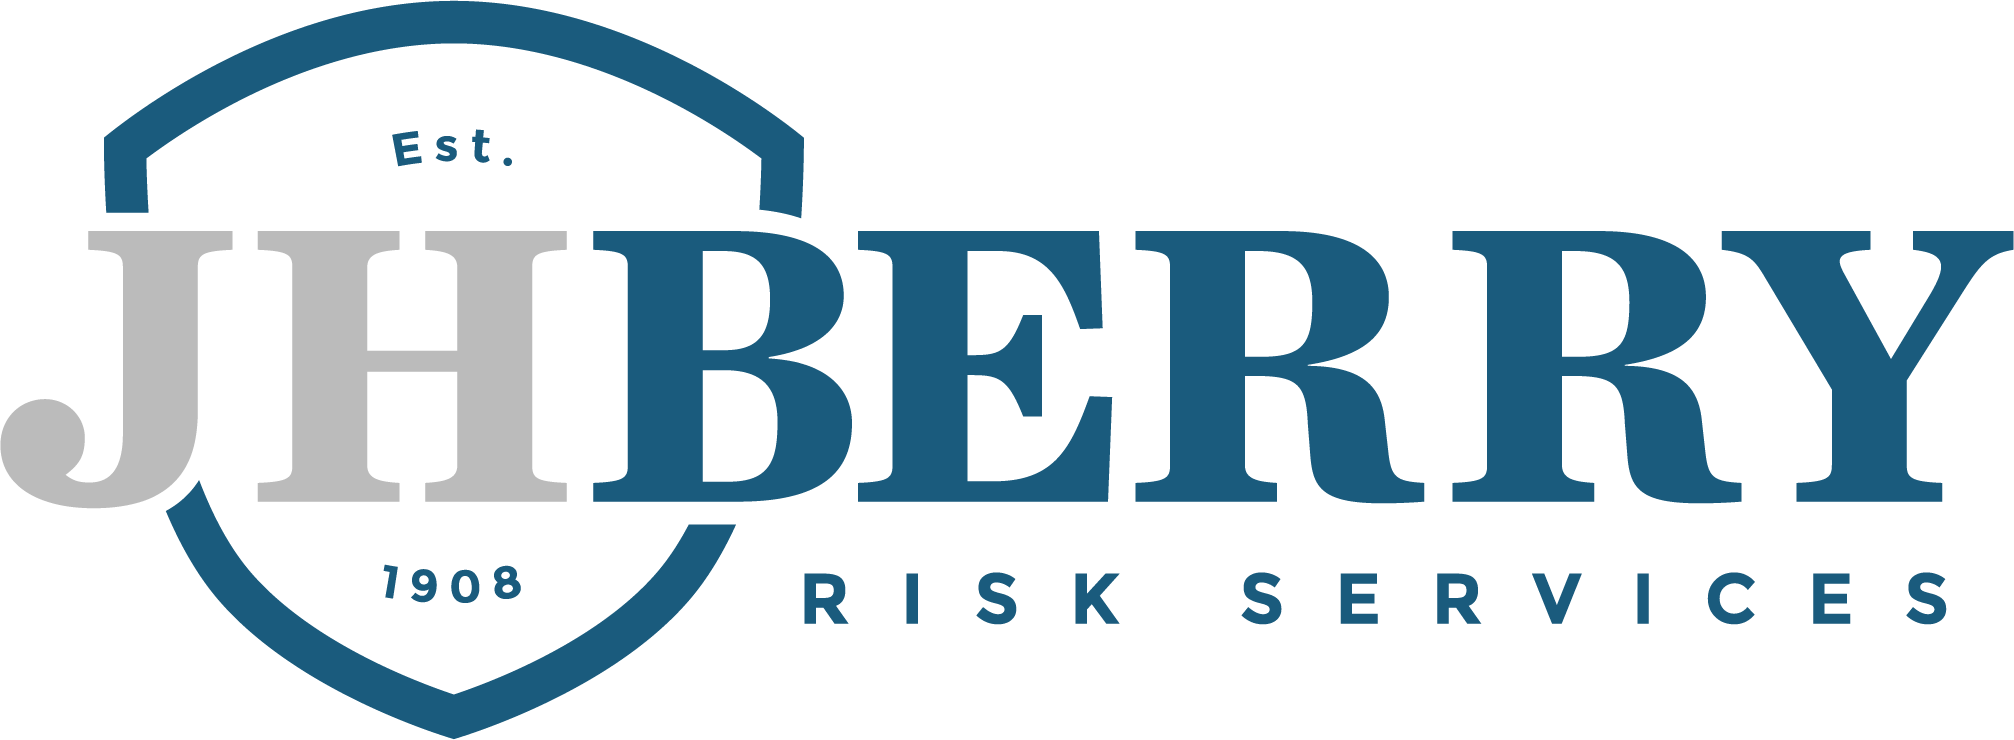 JHBERRY Risk Services